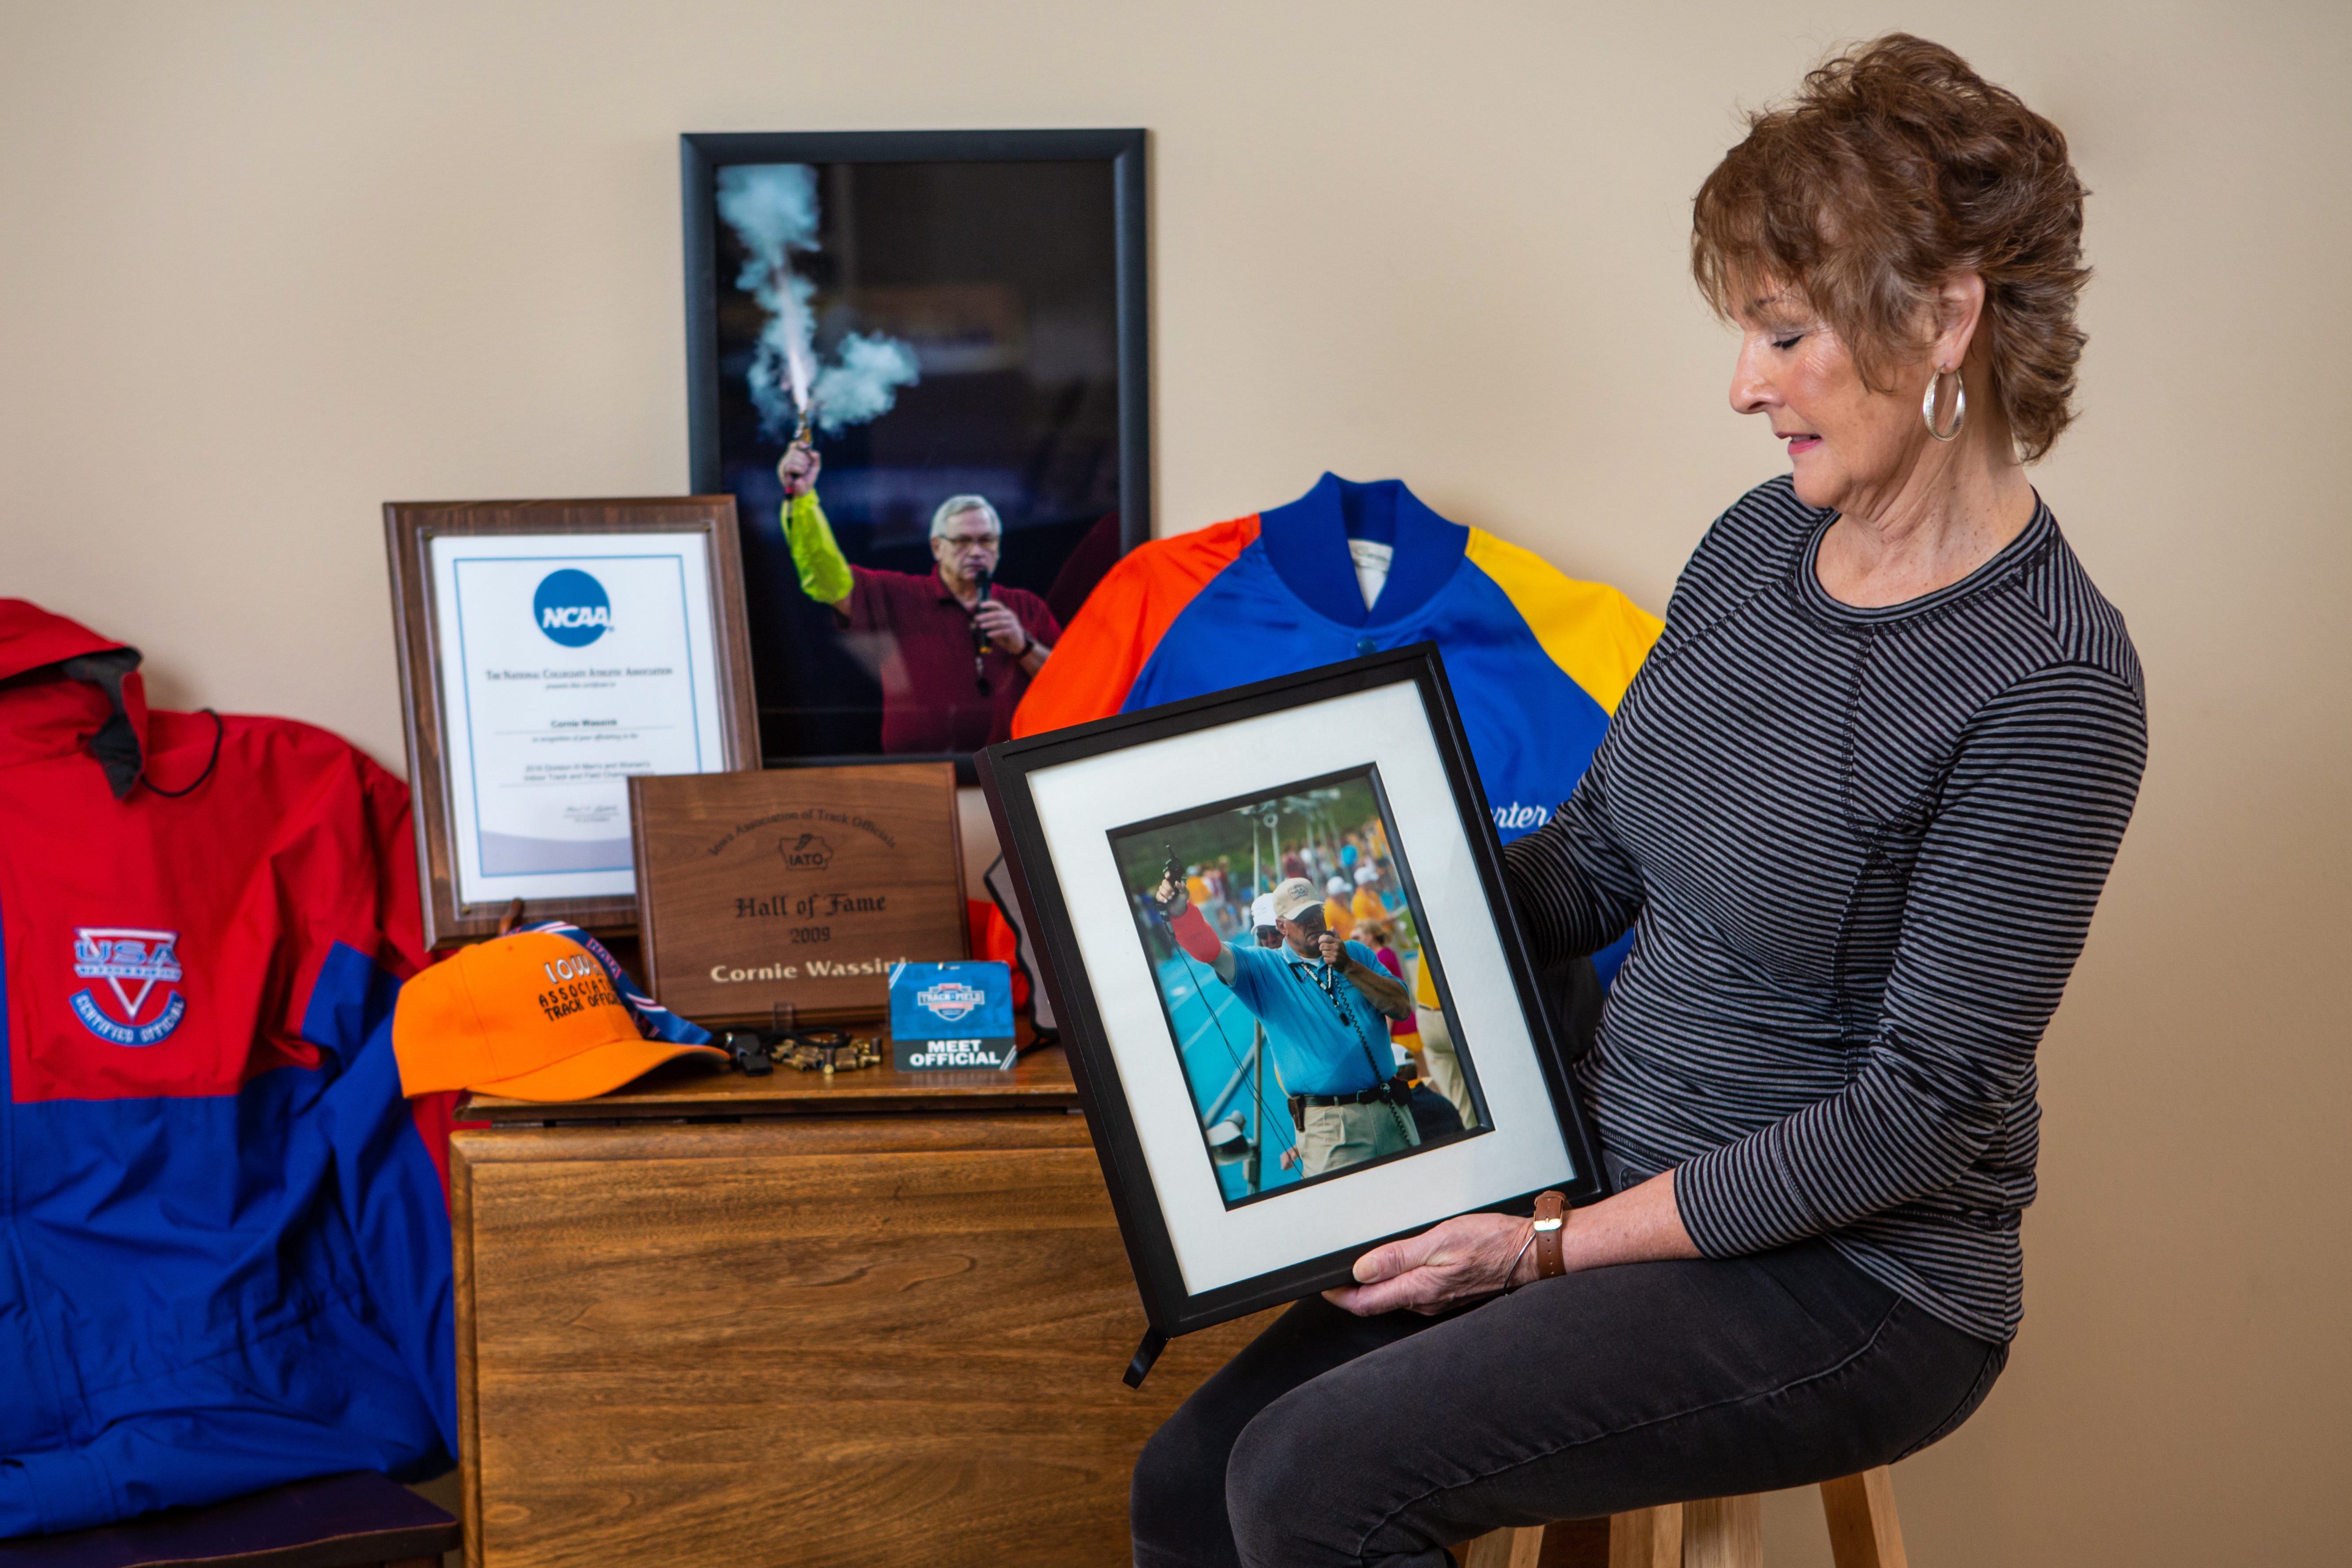 Deb Wassink holds up a picture of her late husband Cornie Wassink who was a beloved track and field official throughout the state.